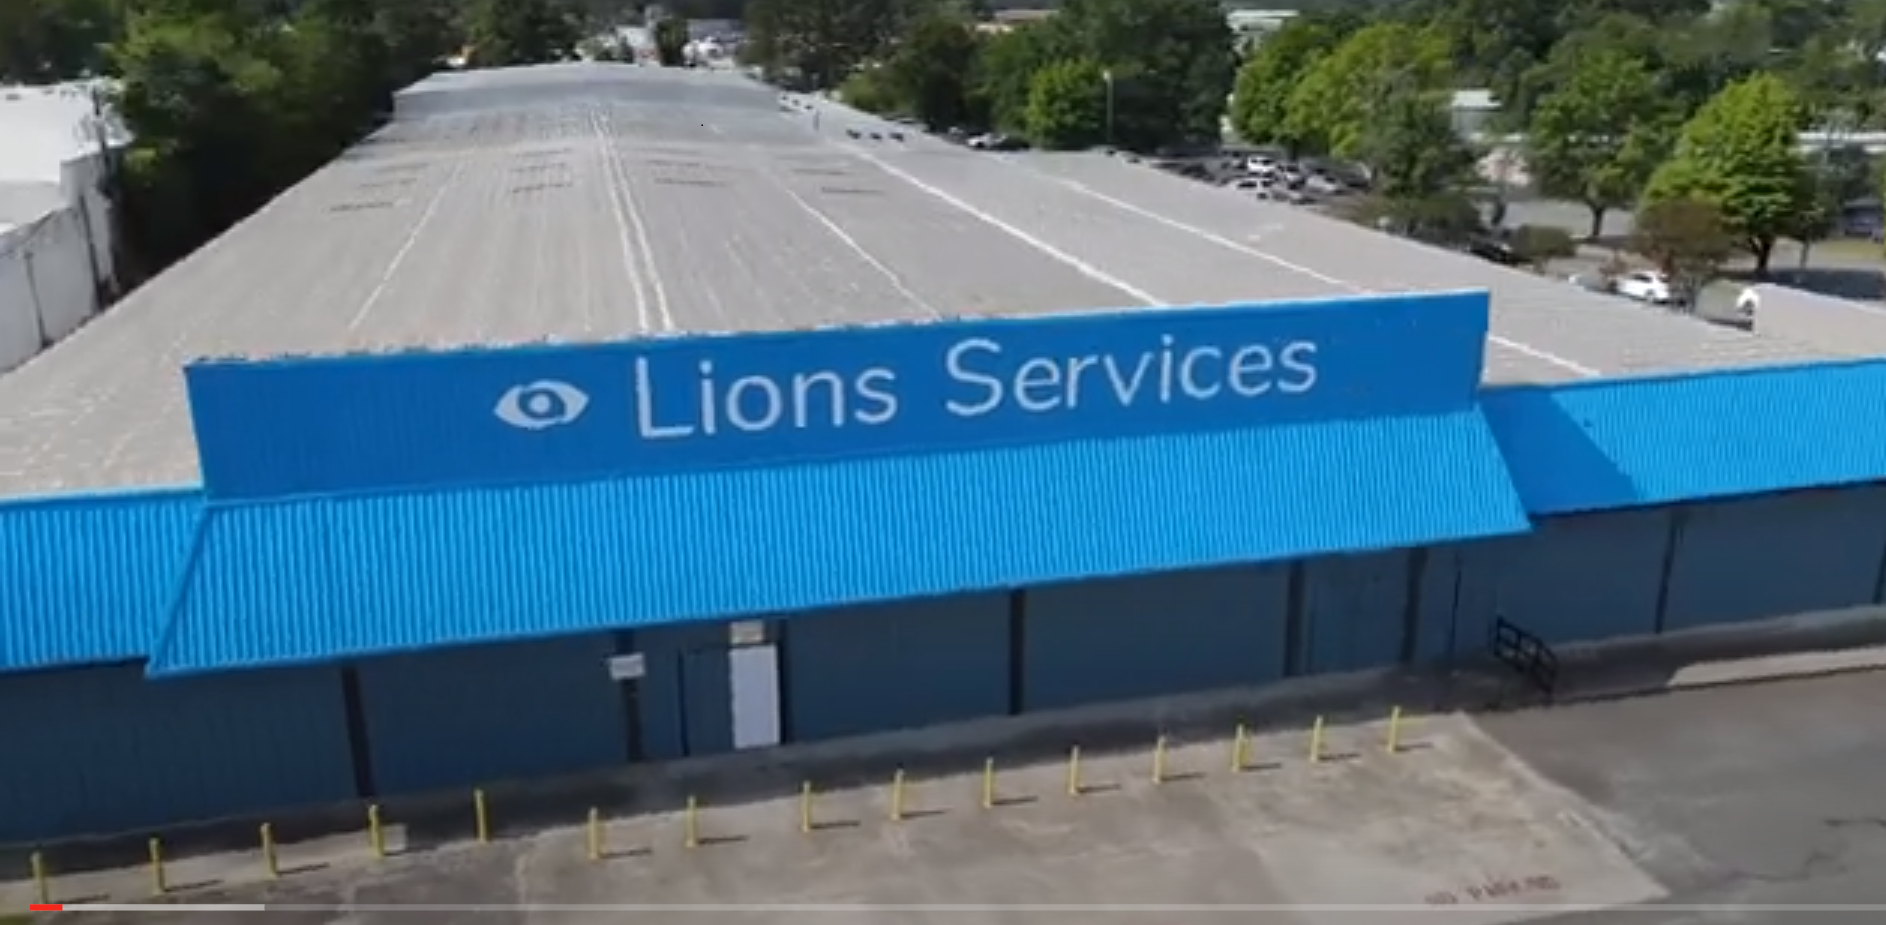 Overhead view of Lions Services Facility. Drone Cam Hovering Over Blue Lions Services Building.